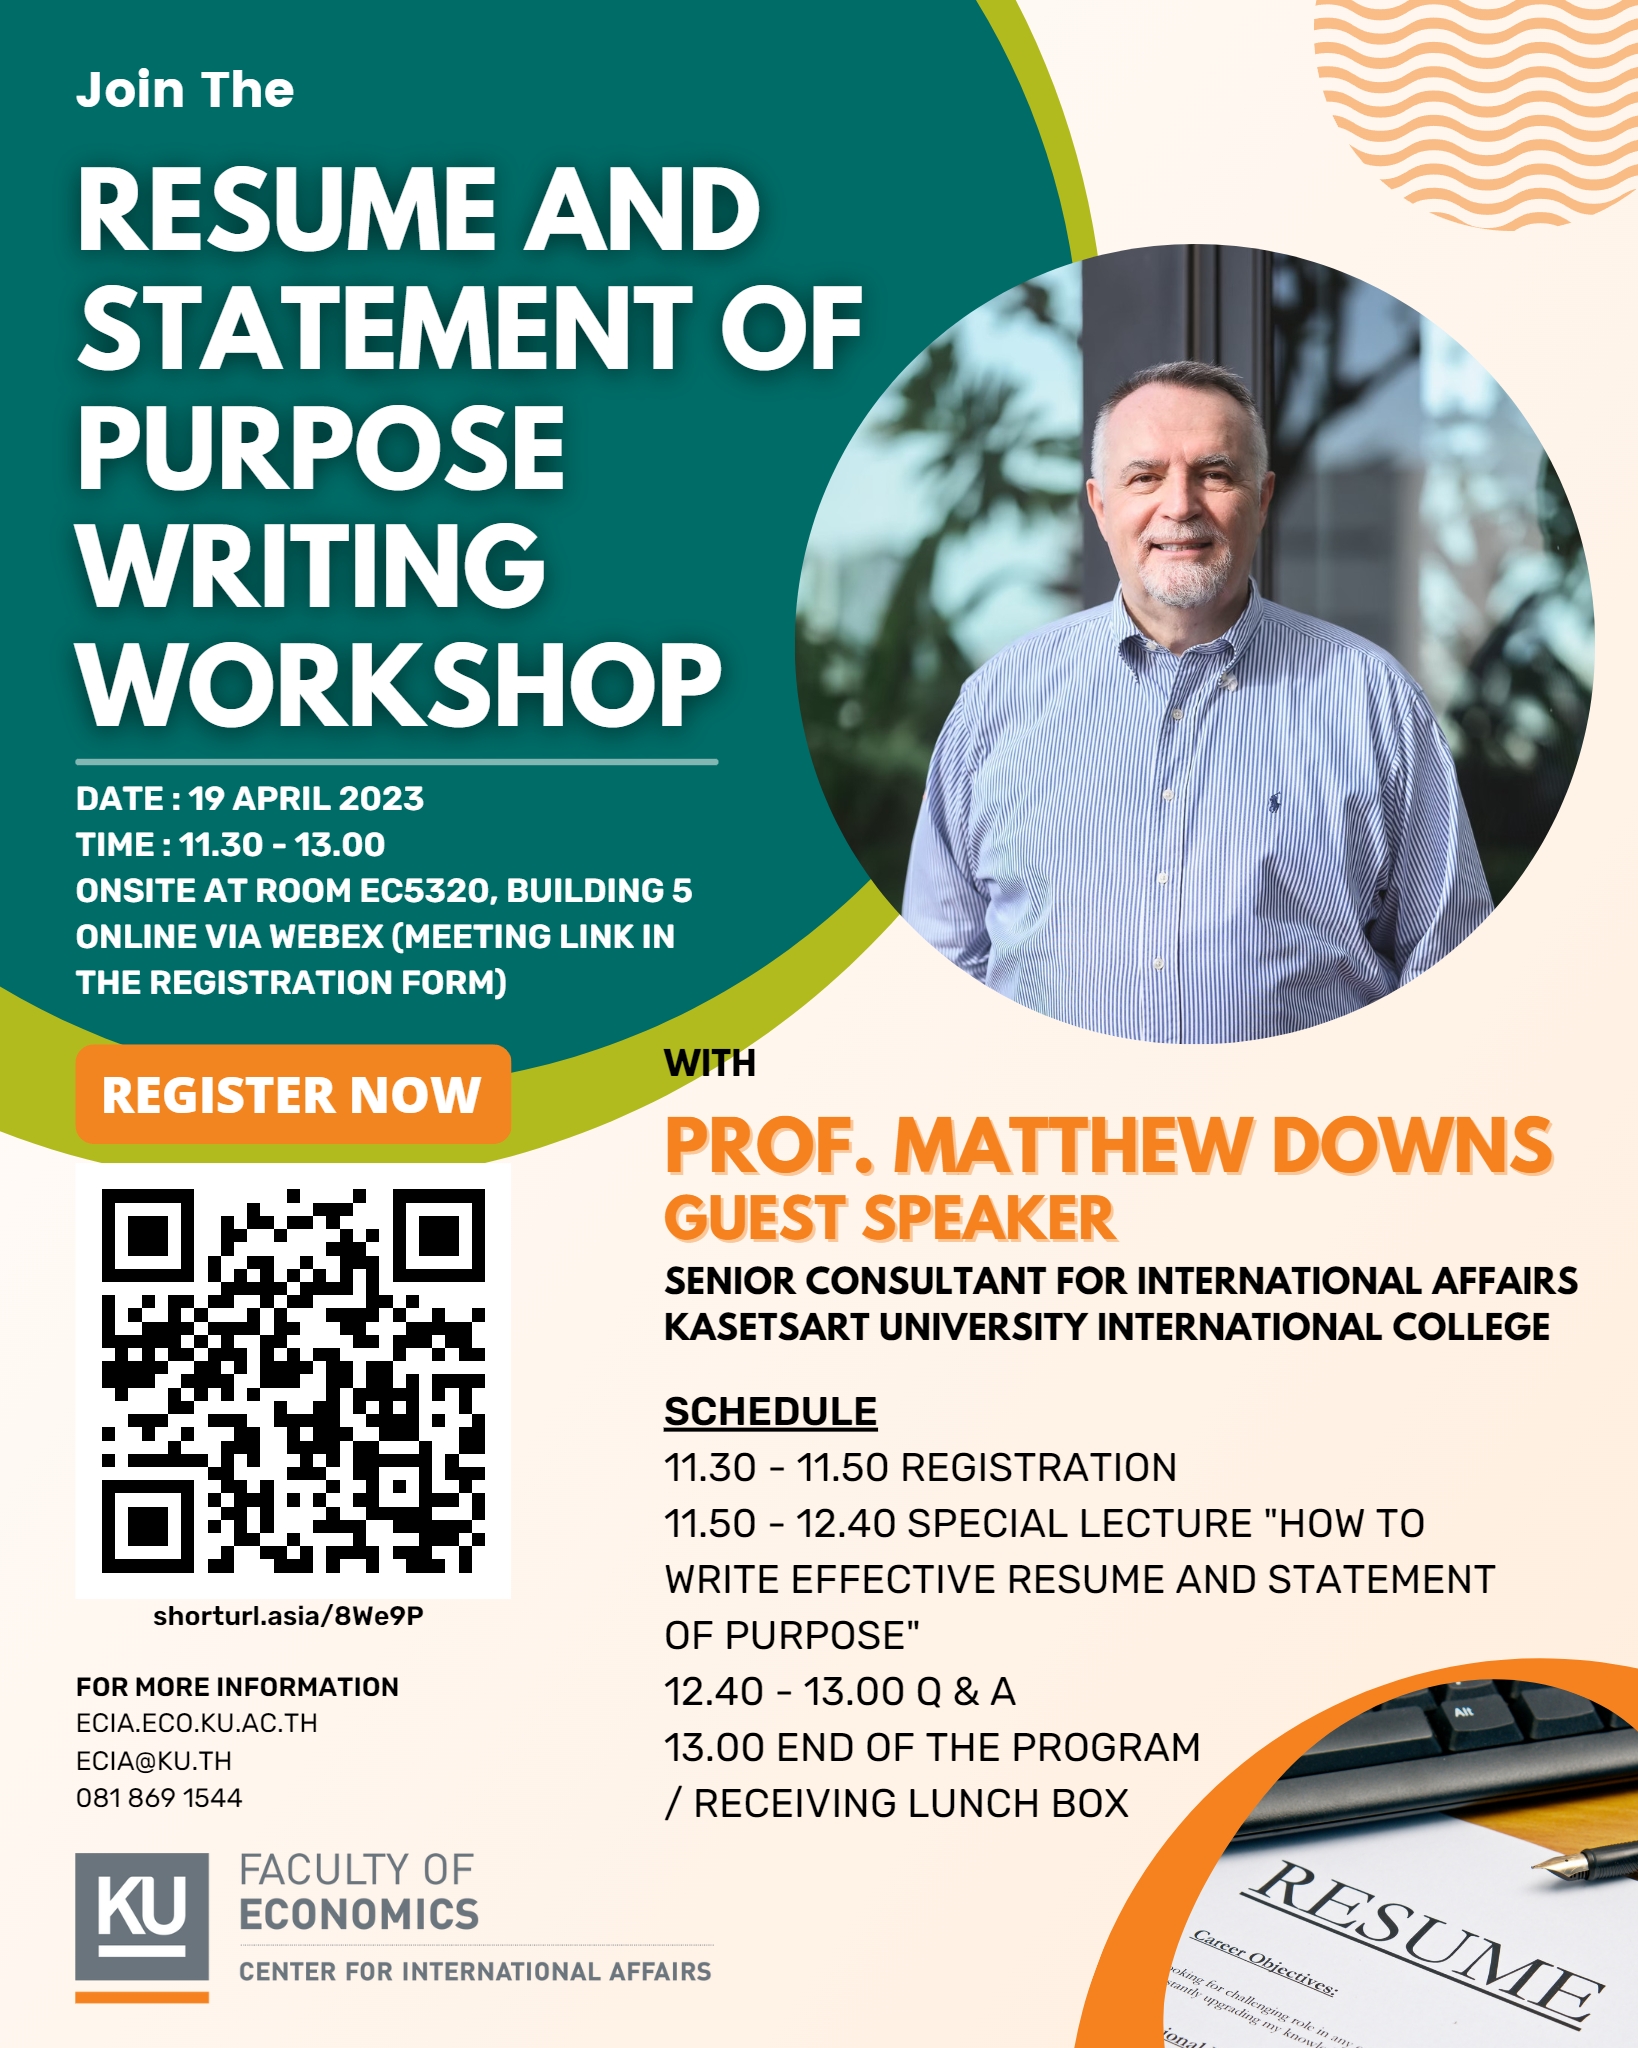 Resume and Statement of Purpose Writing Workshop 2023